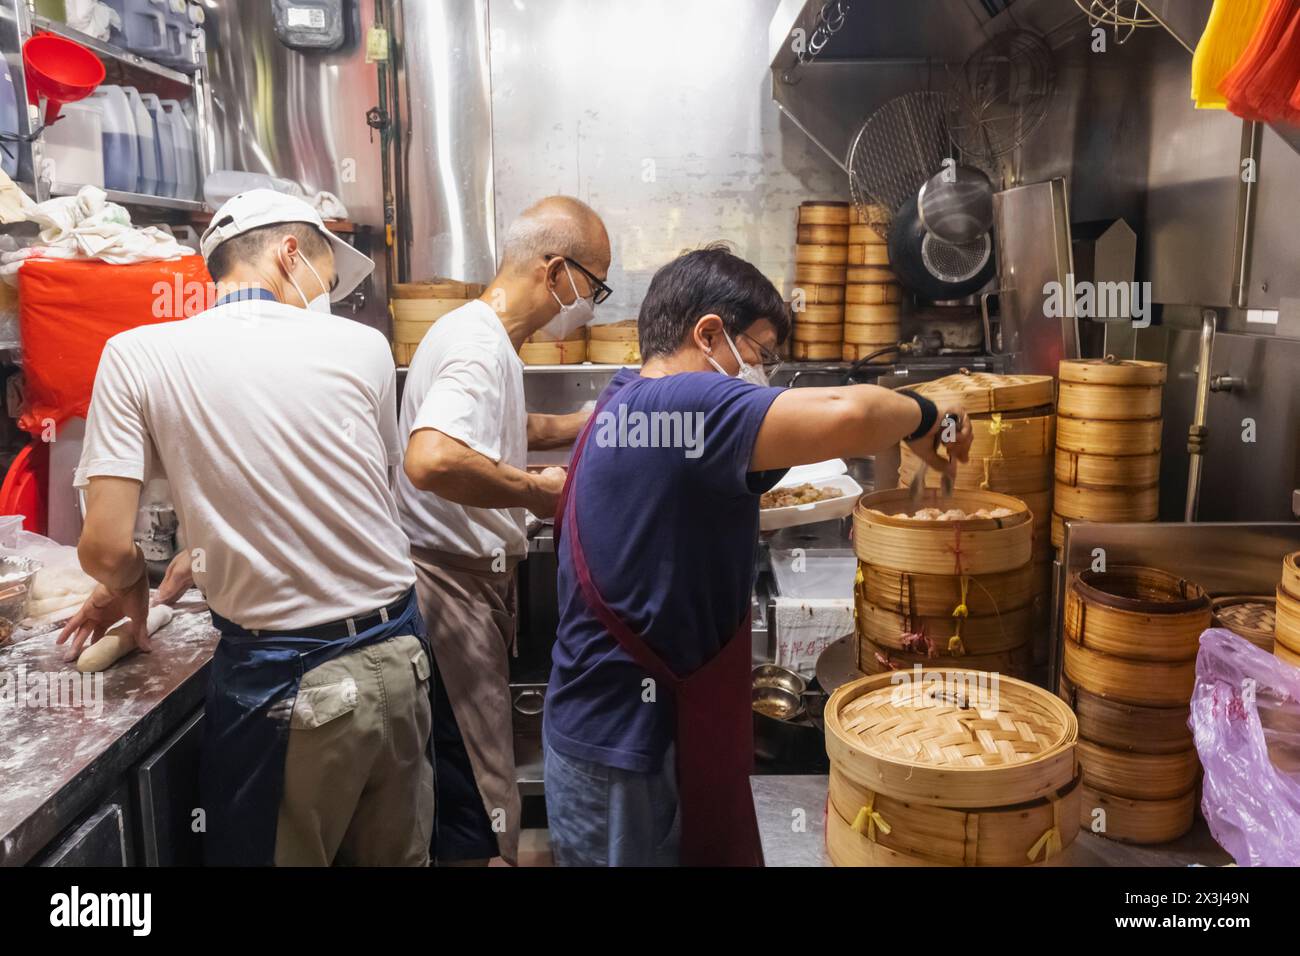 Asia, Singapore, Chinatown, Typical Food Court, Hawker Stall Kitchen Making Chinese Dim Sum Steamed Food Stock Photo